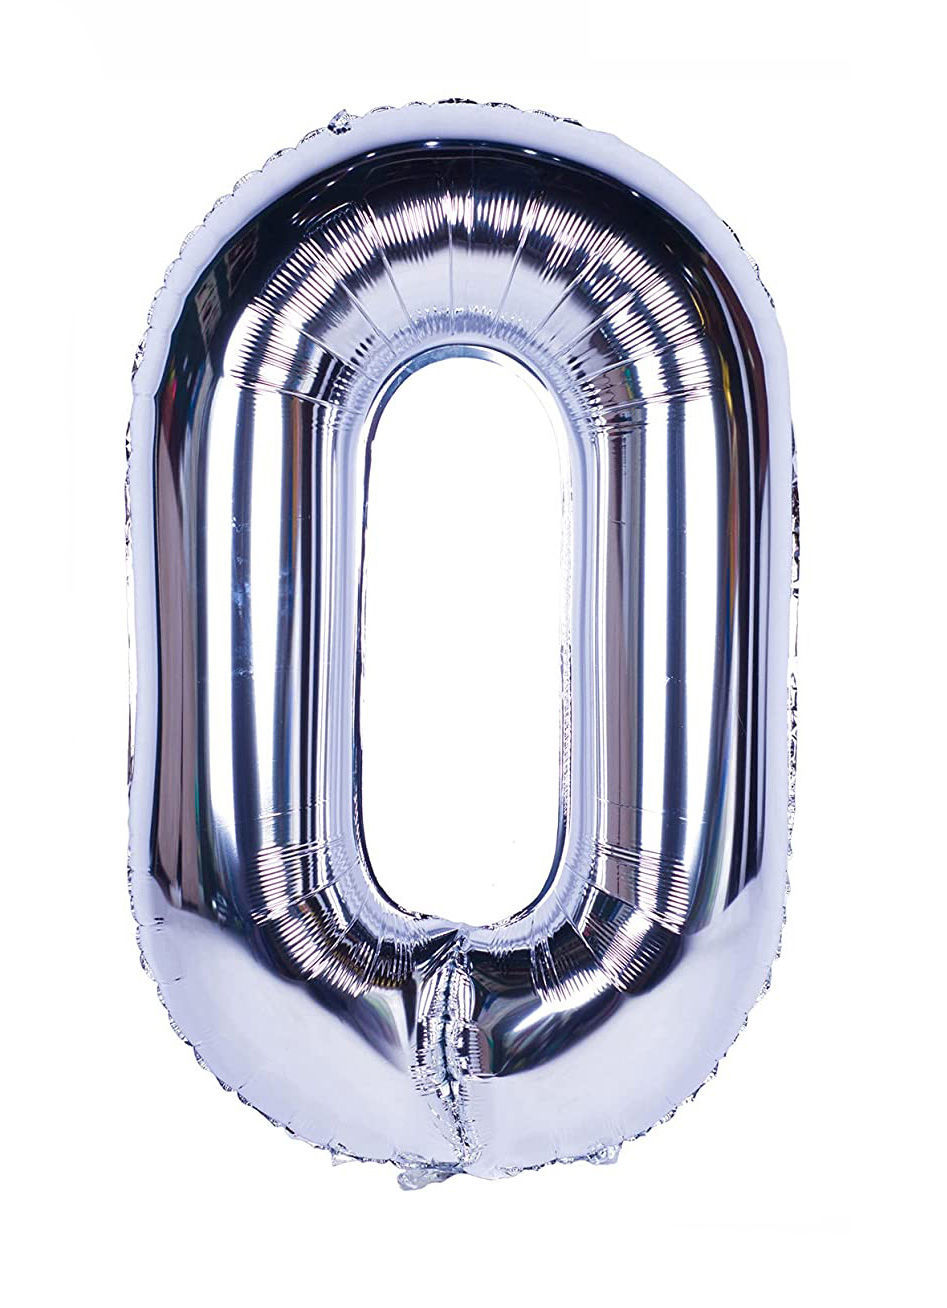 Picture of 34'' Foil Balloon Number 0 - Silver (helium-filled)